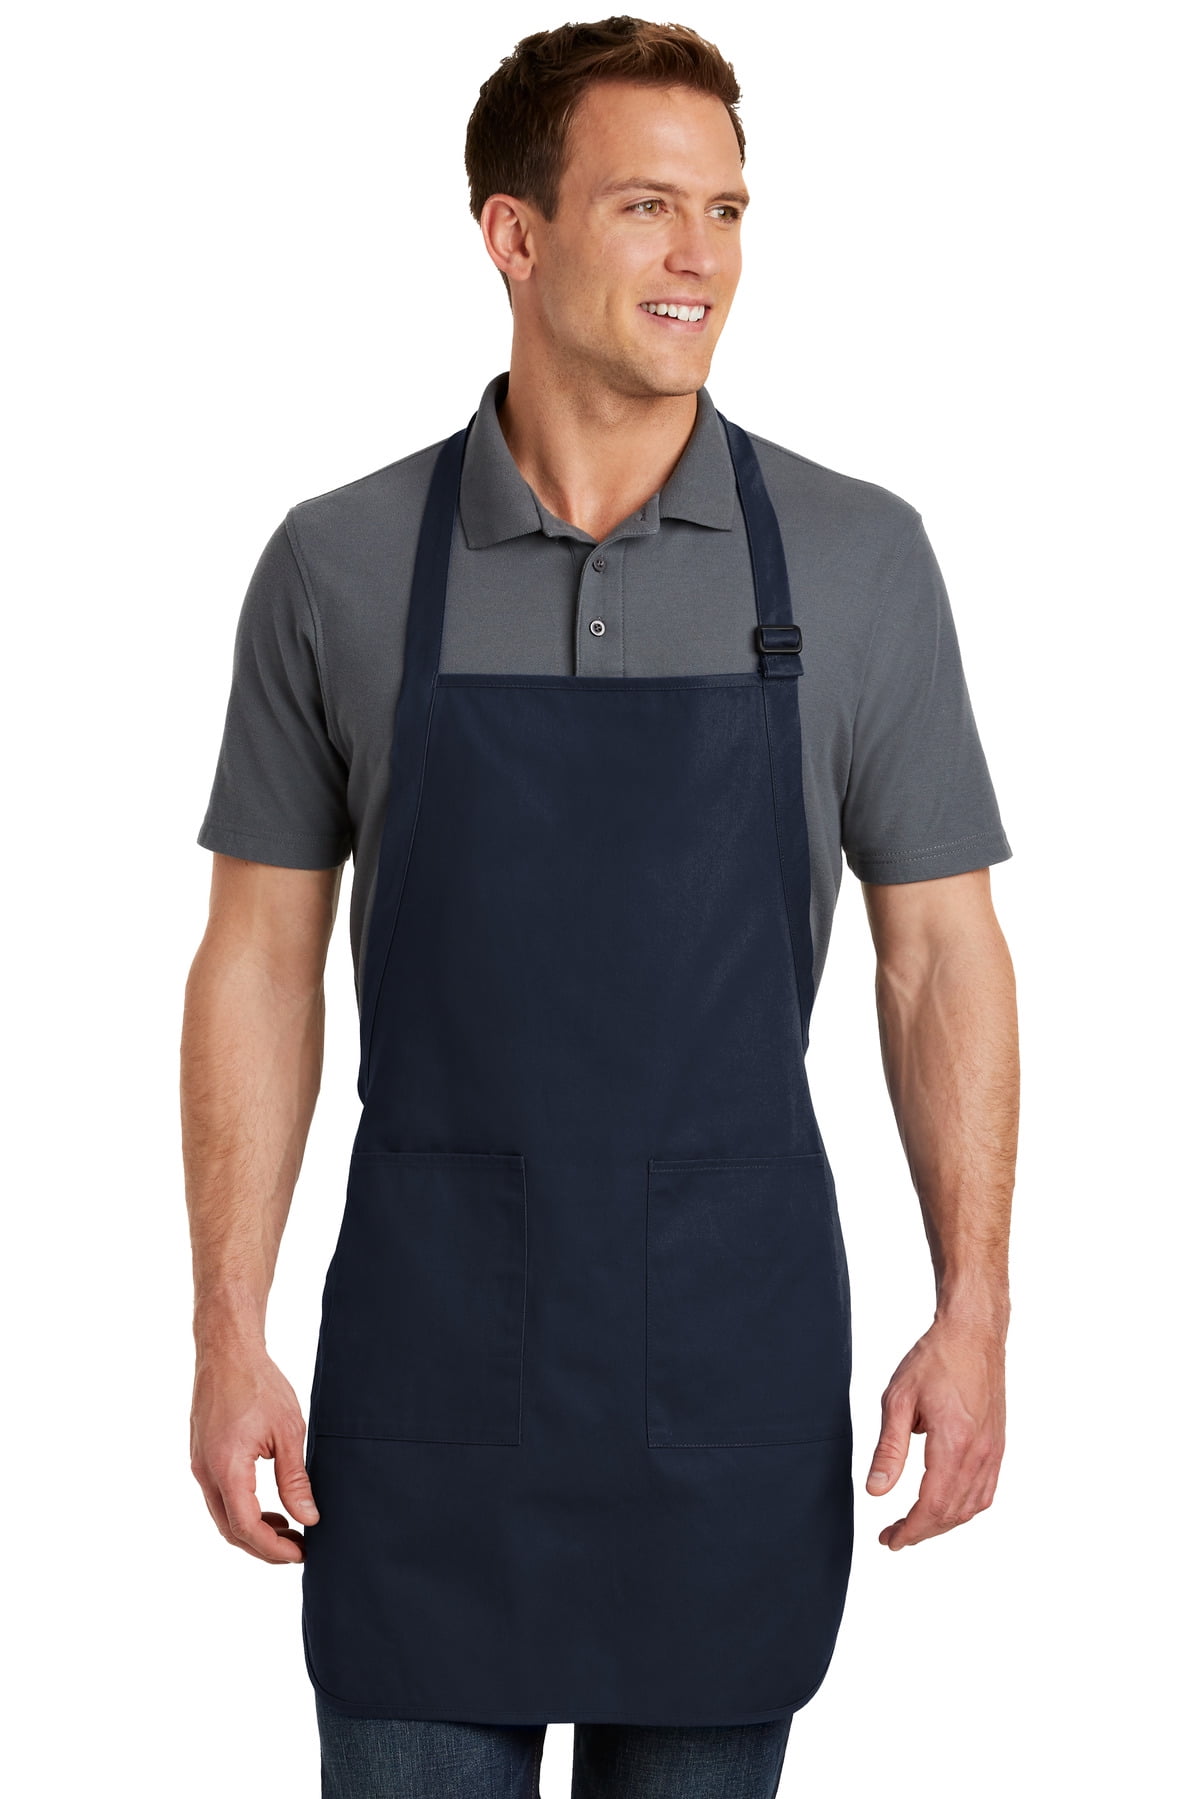 premium Tabbard Apron With Pocket WorkWear Overall Catering Laundry Cleaning RED 